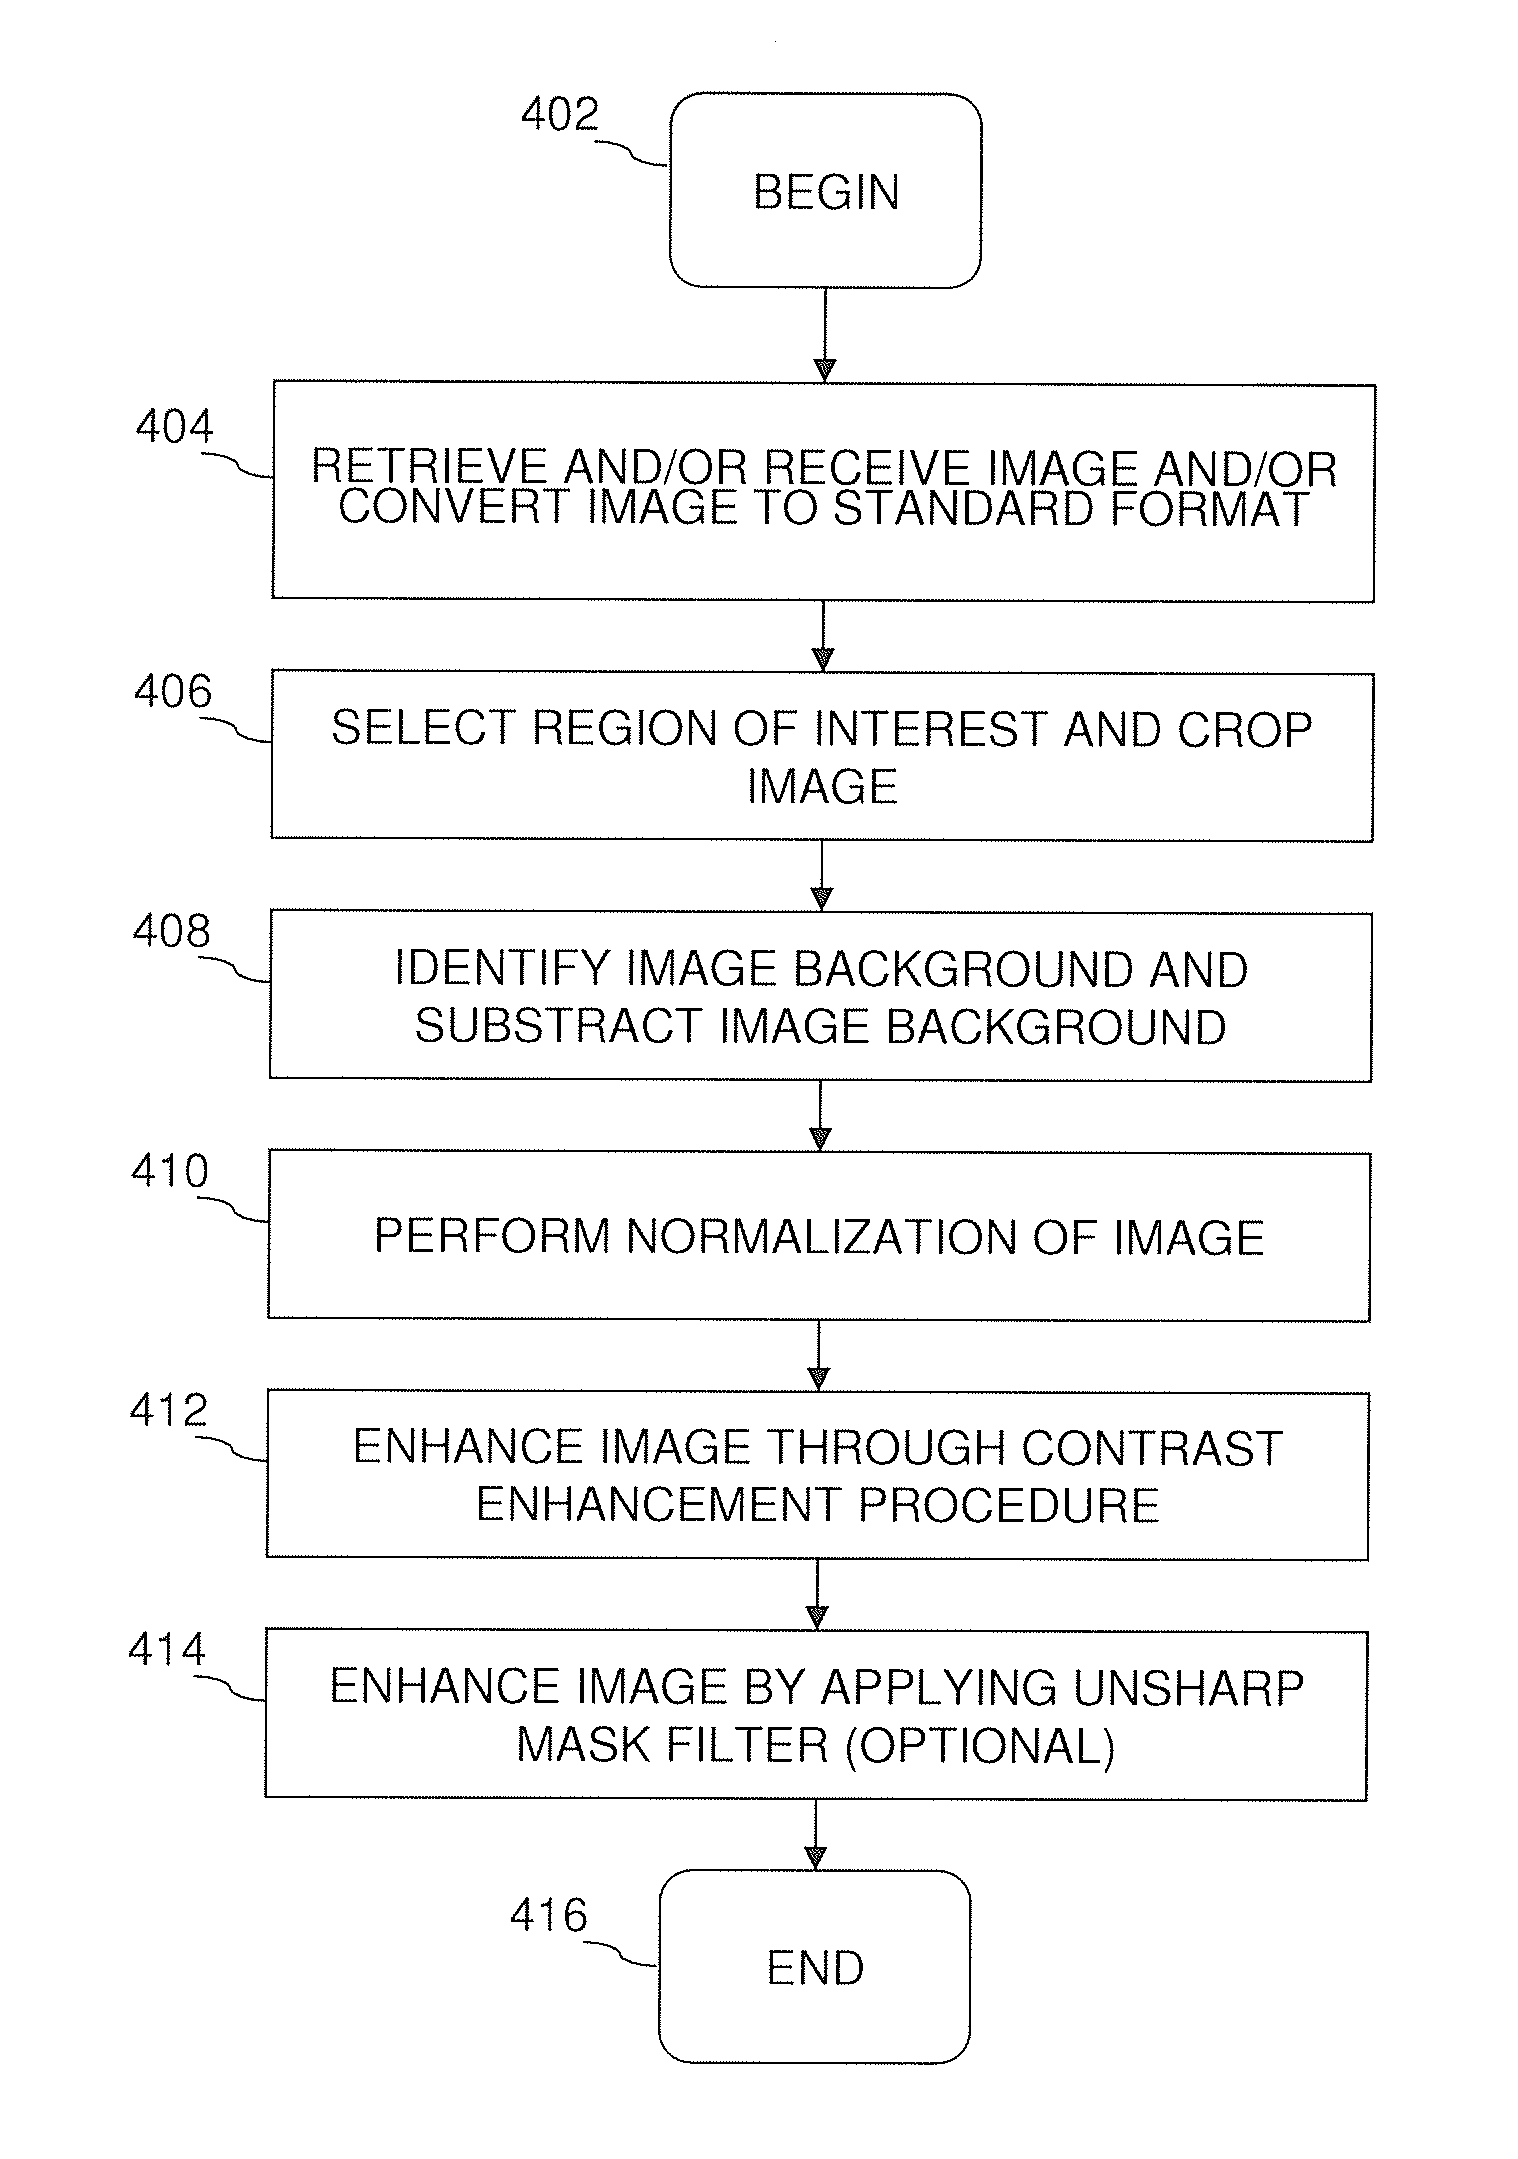 Image enhancement and application functionality for medical and other uses